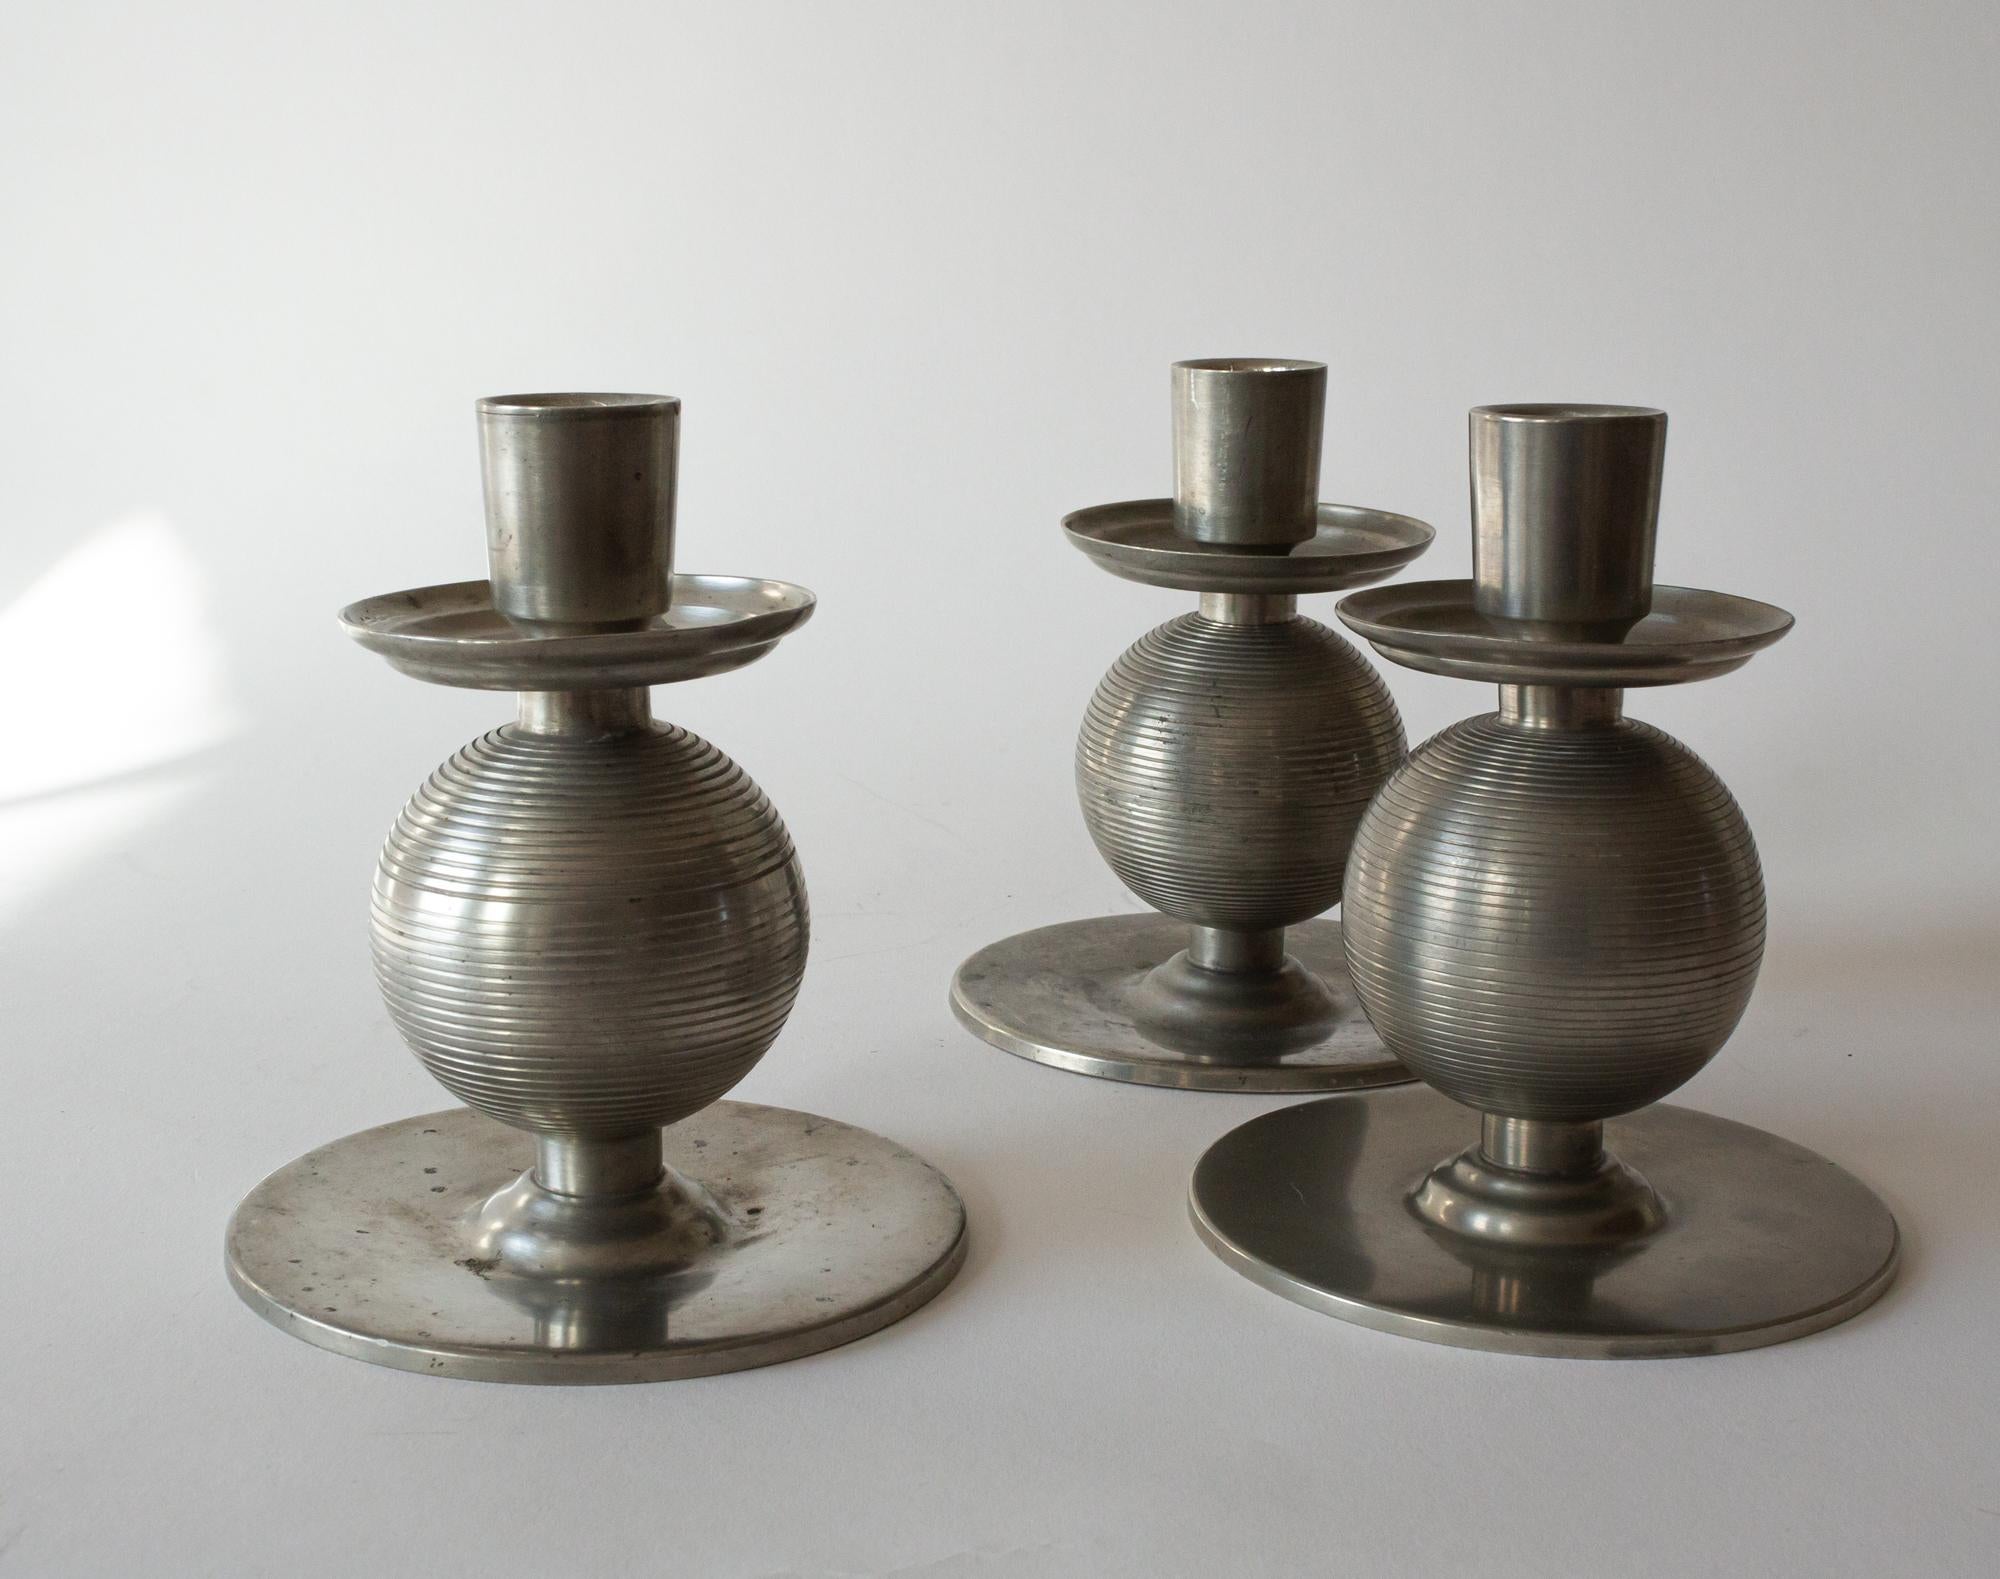 Scandinavian Modern Three Art Deco Pewter Candlesticks Signed by Nils Fougstedt and Made 1937 For Sale